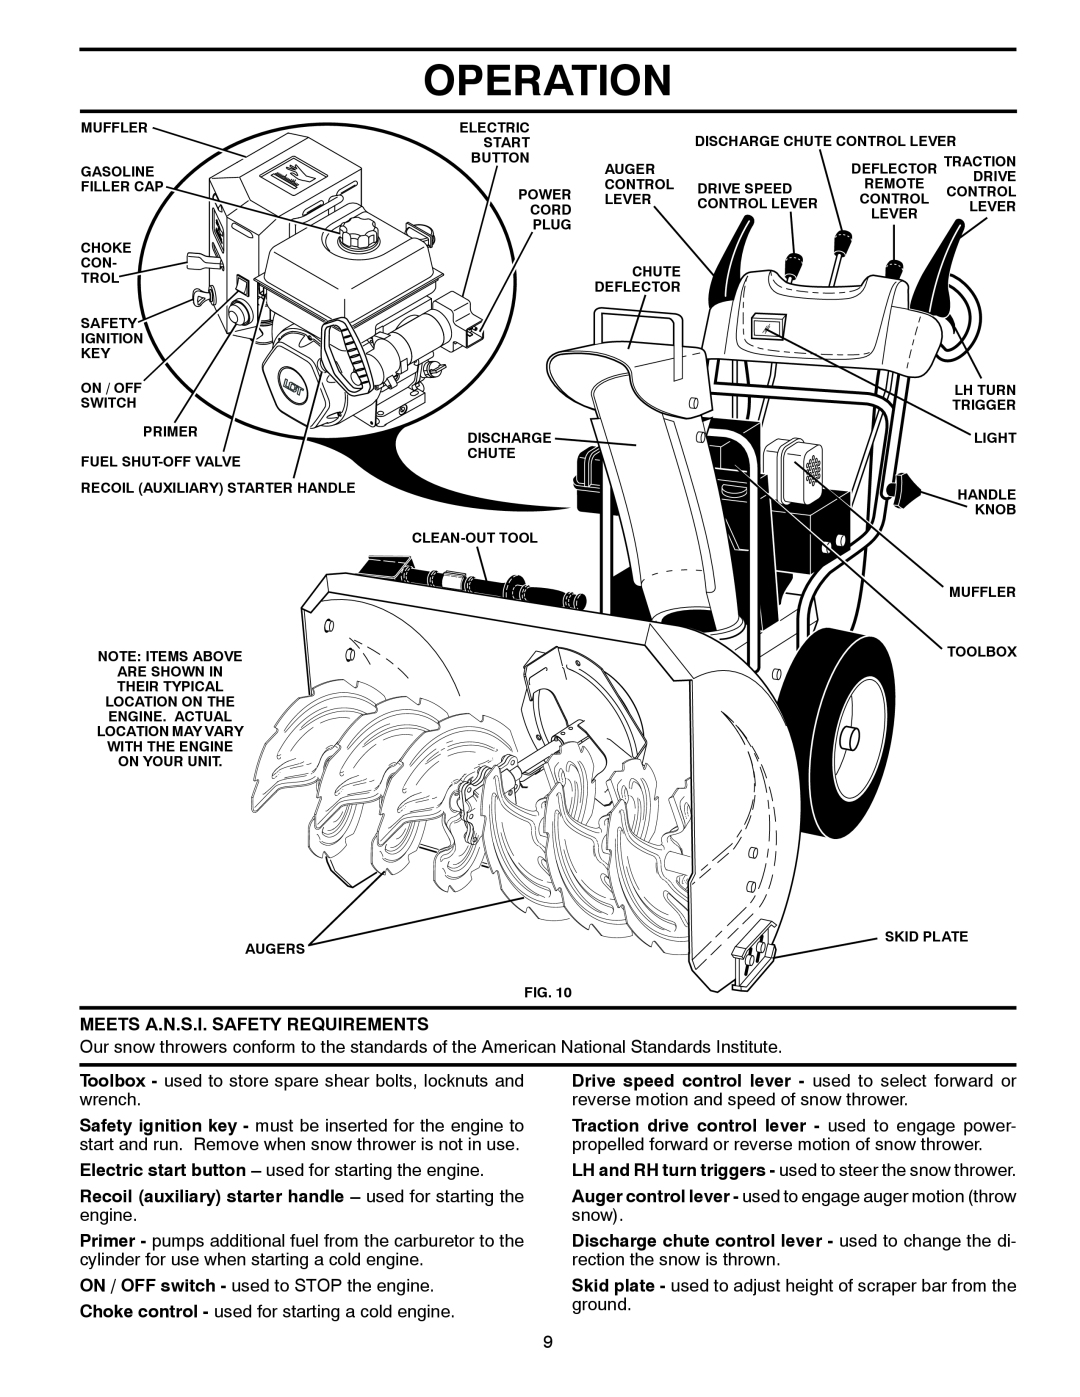 Husqvarna 96193005400, 1830HV manual Operation, Meets A.N.S.I. Safety Requirements 